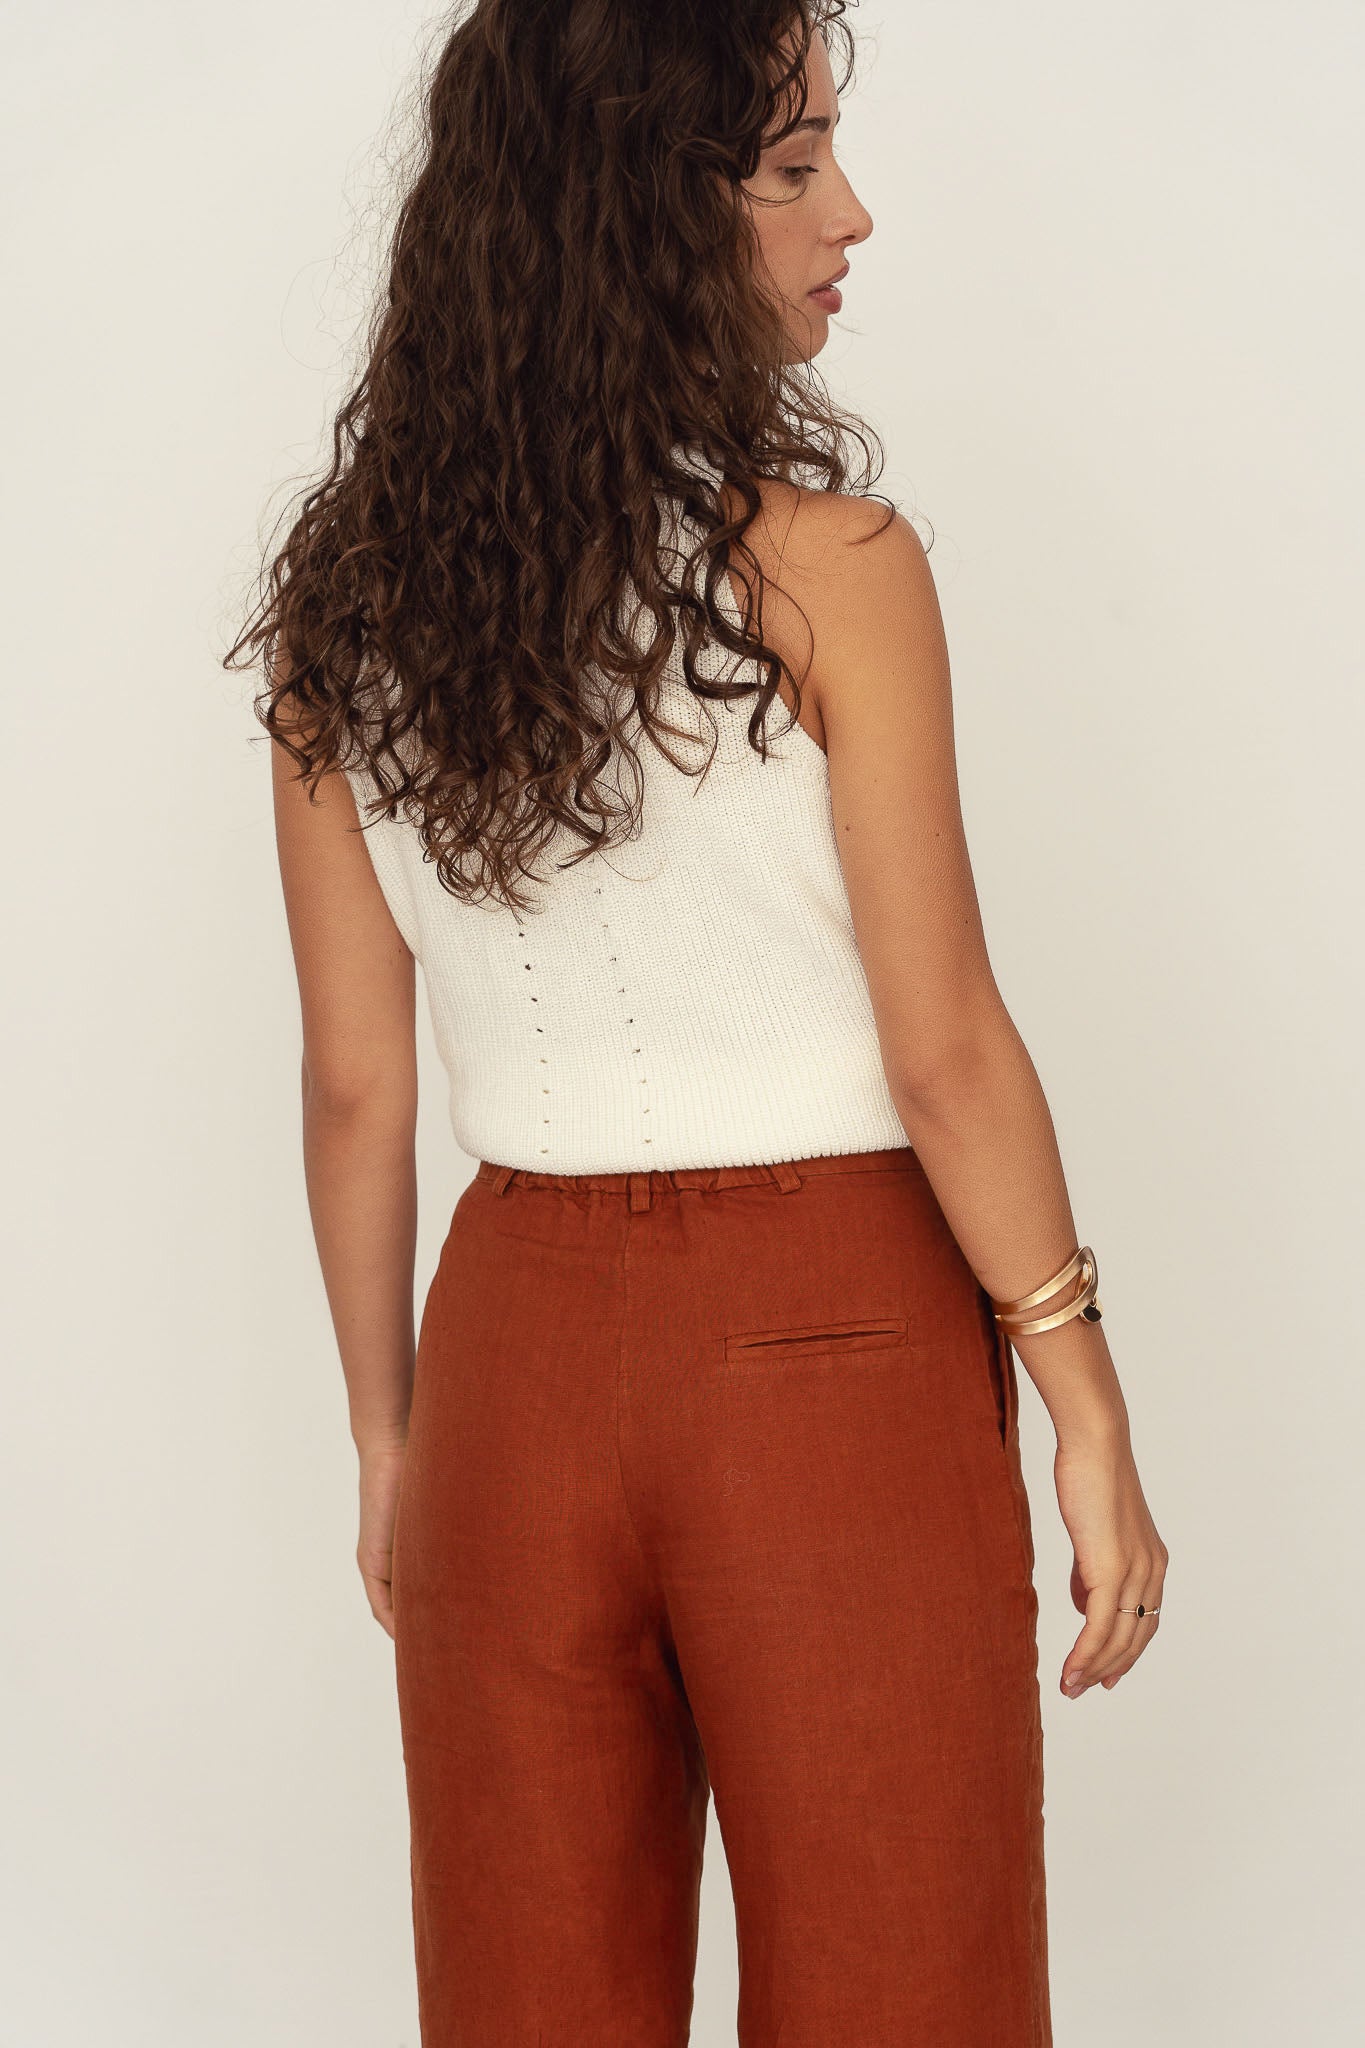 Naz women's tailored linen pants. High-waisted wide leg breathable fabric in rust.